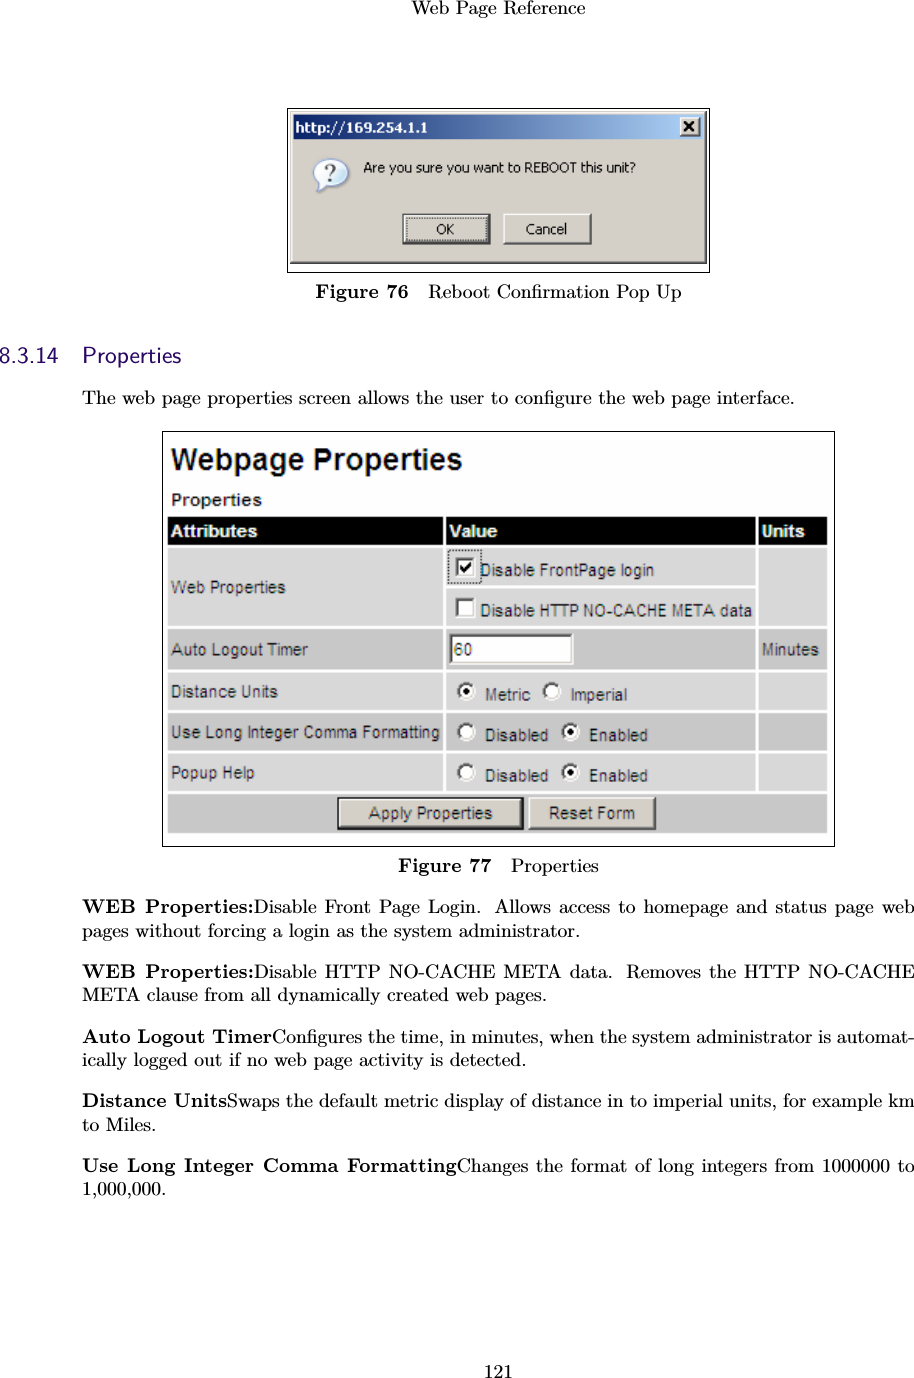 Web Page Reference121Figure 76 Reboot Conﬁrmation Pop Up8.3.14 PropertiesThe web page properties screen allows the user to conﬁgure the web page interface.Figure 77 PropertiesWEB Properties:Disable Front Page Login. Allows access to homepage and status page webpages without forcing a login as the system administrator.WEB Properties:Disable HTTP NO-CACHE META data. Removes the HTTP NO-CACHEMETA clause from all dynamically created web pages.Auto Logout TimerConﬁgures the time, in minutes, when the system administrator is automat-ically logged out if no web page activity is detected.Distance UnitsSwaps the default metric display of distance in to imperial units, for example kmto Miles.Use Long Integer Comma FormattingChanges the format of long integers from 1000000 to1,000,000.